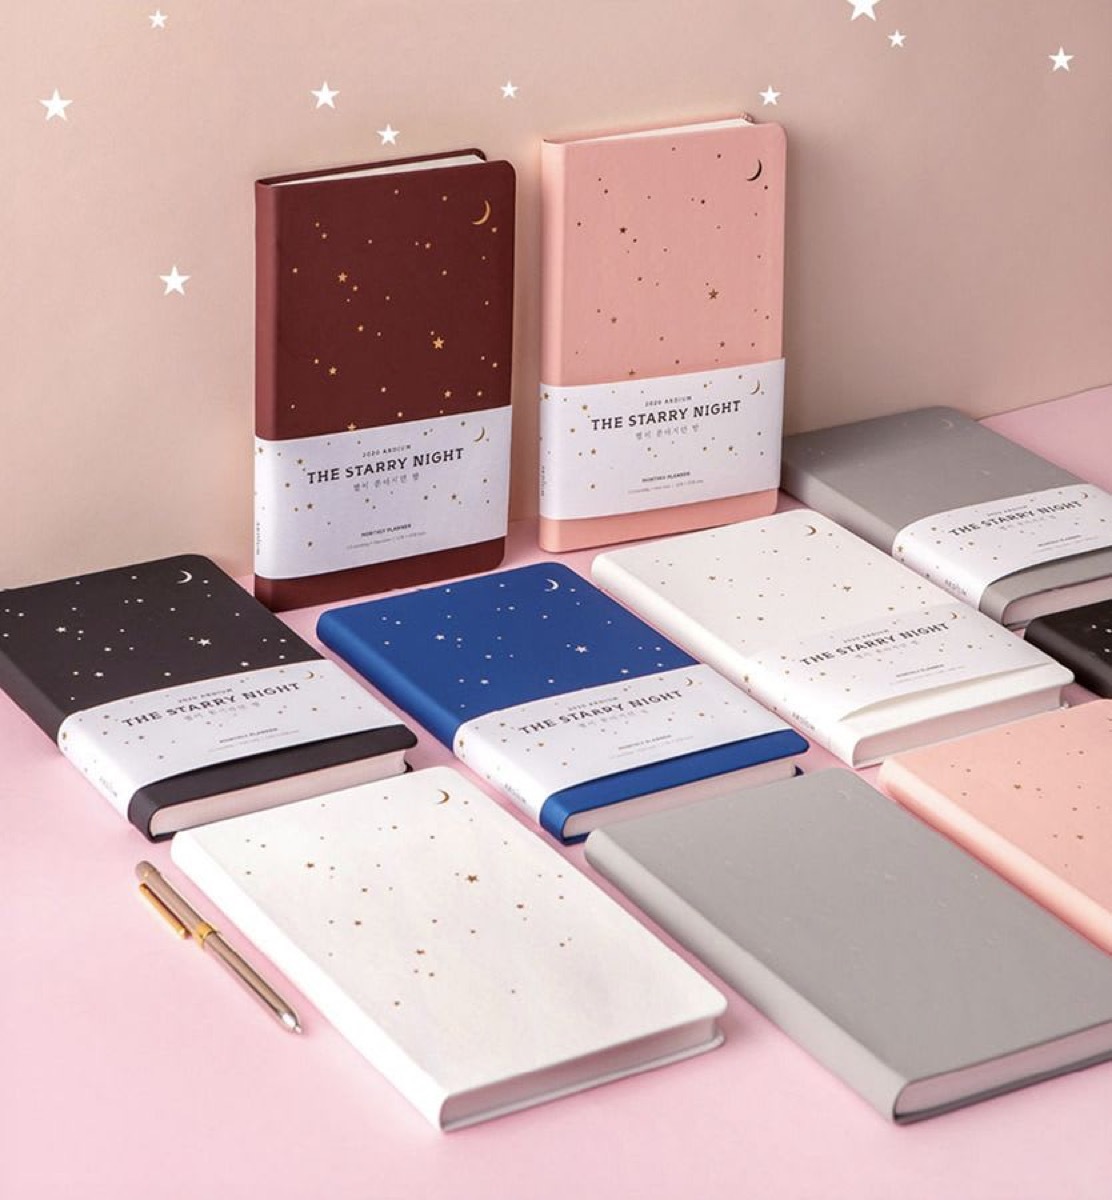 Set of 2020 planners with star design